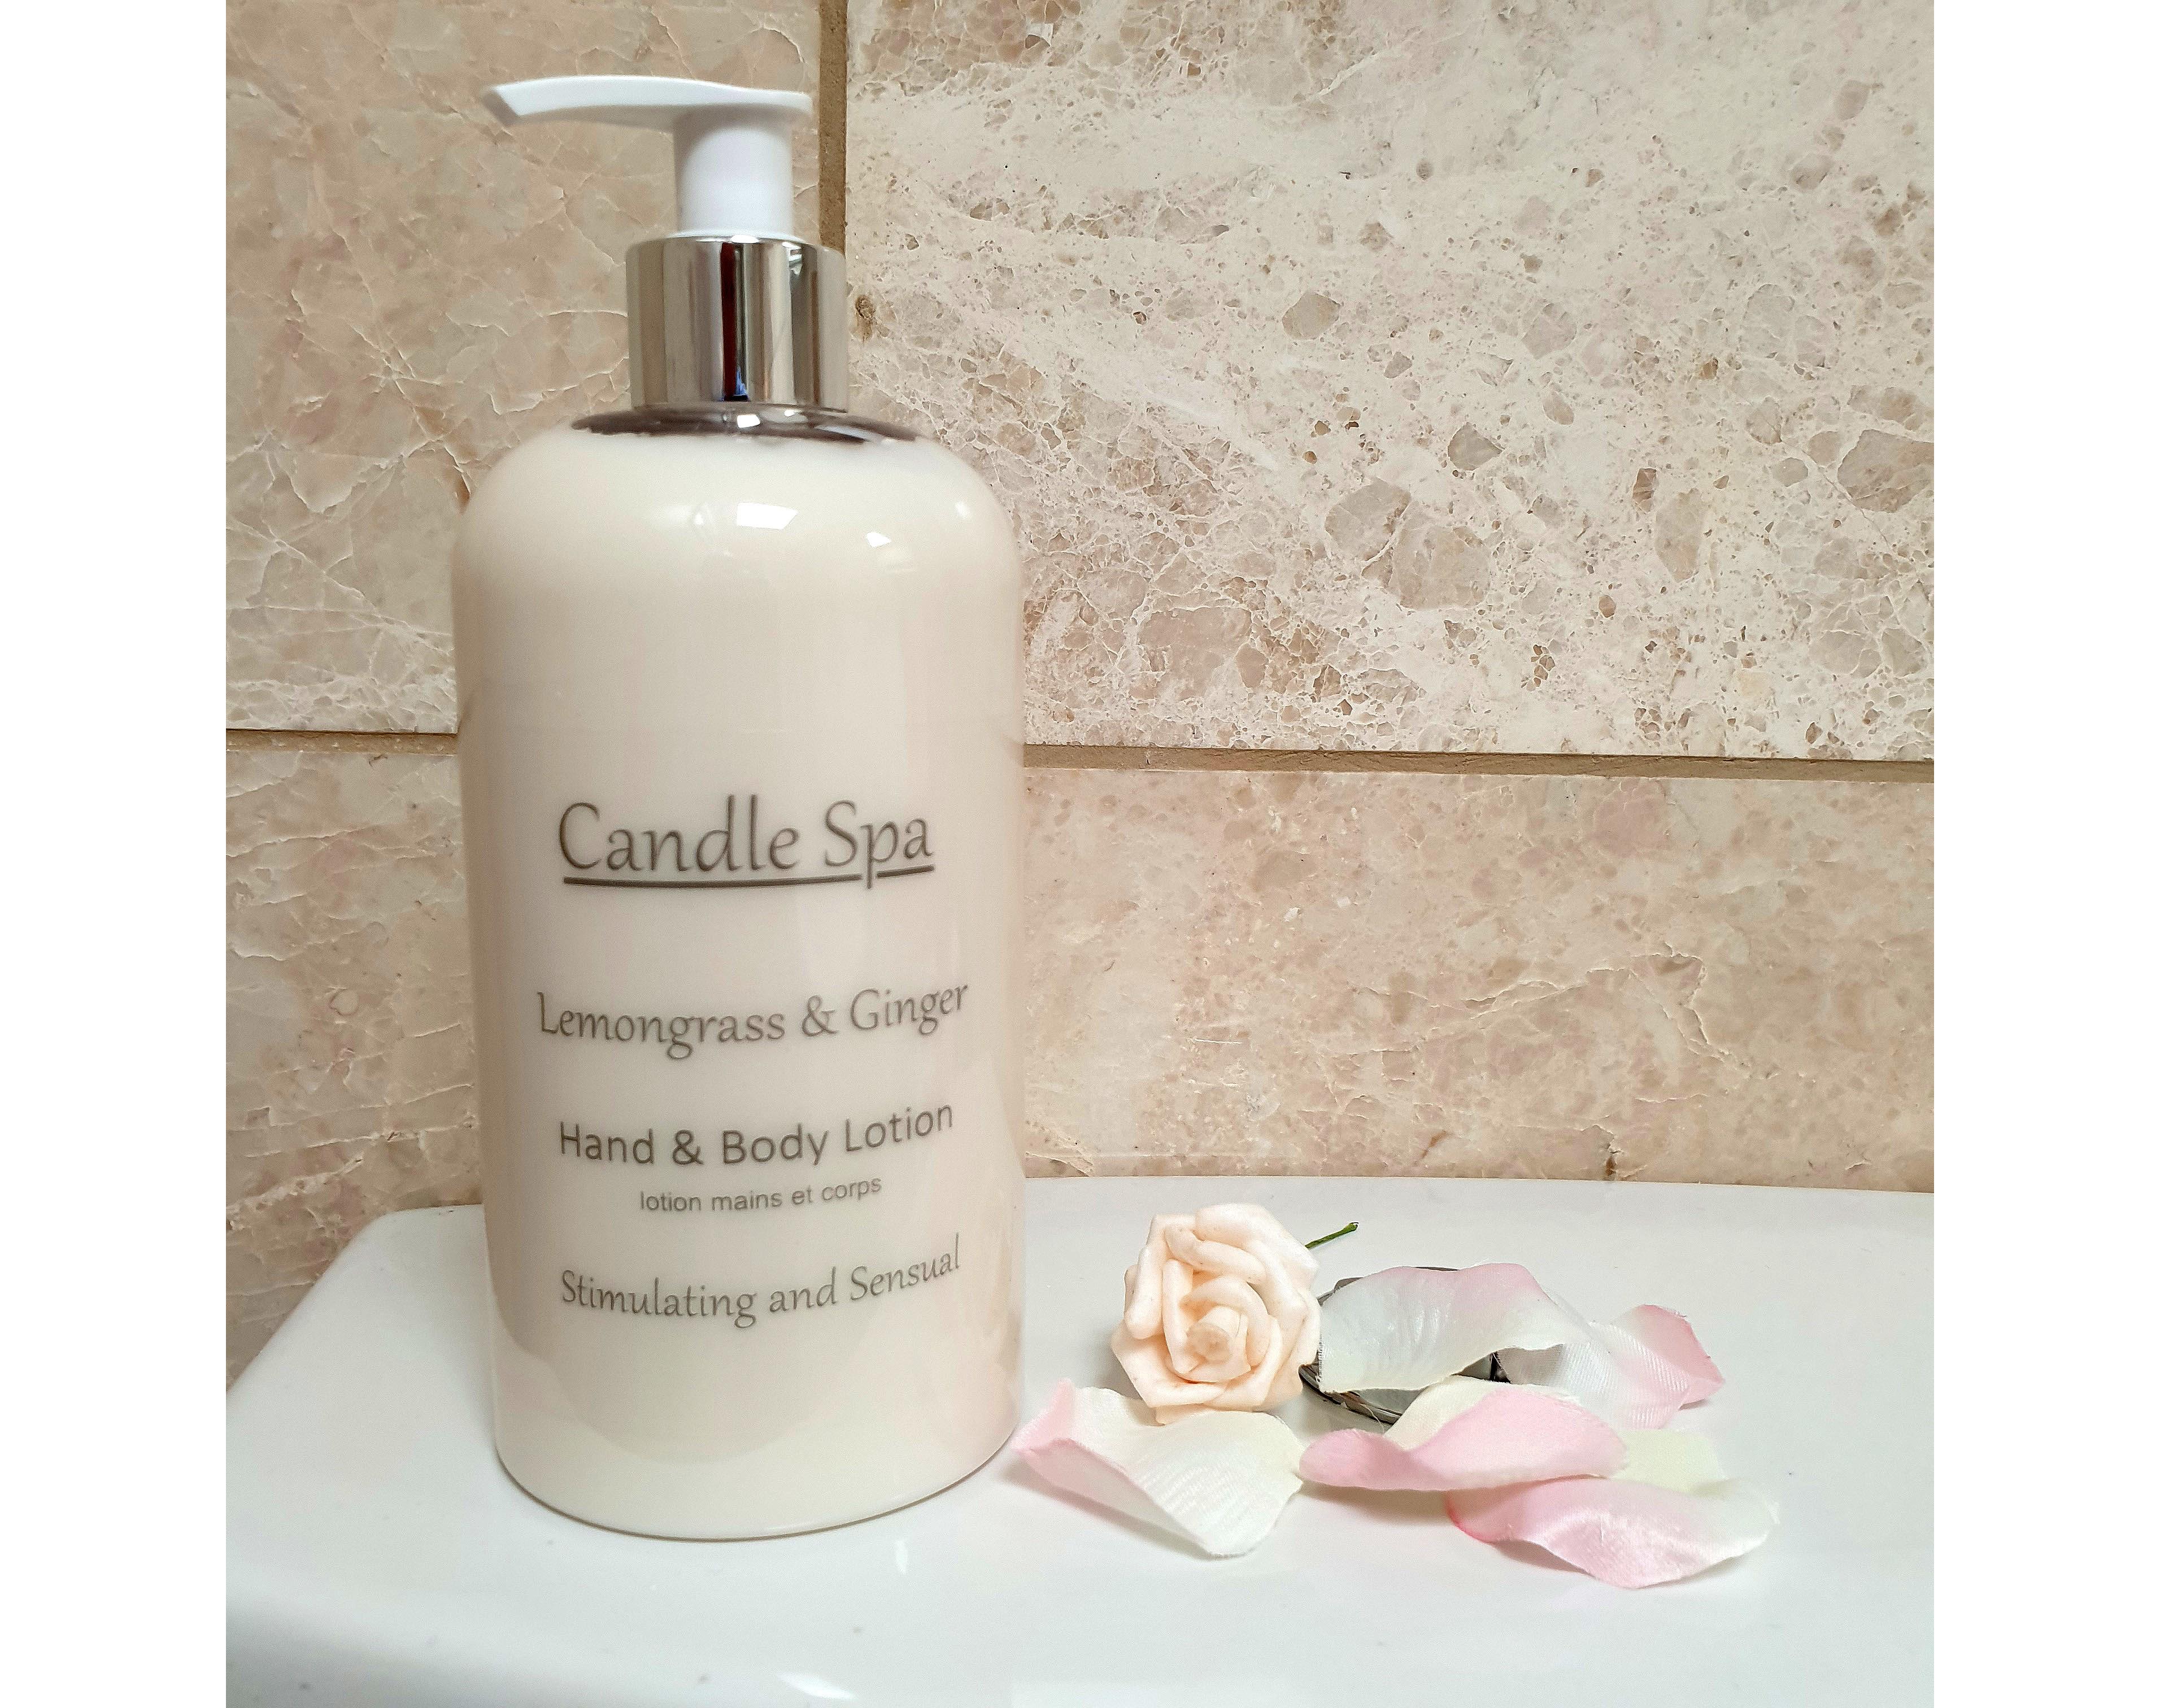 Candle Spa Hand & Body Lotion 500ml - Lemongrass & Ginger